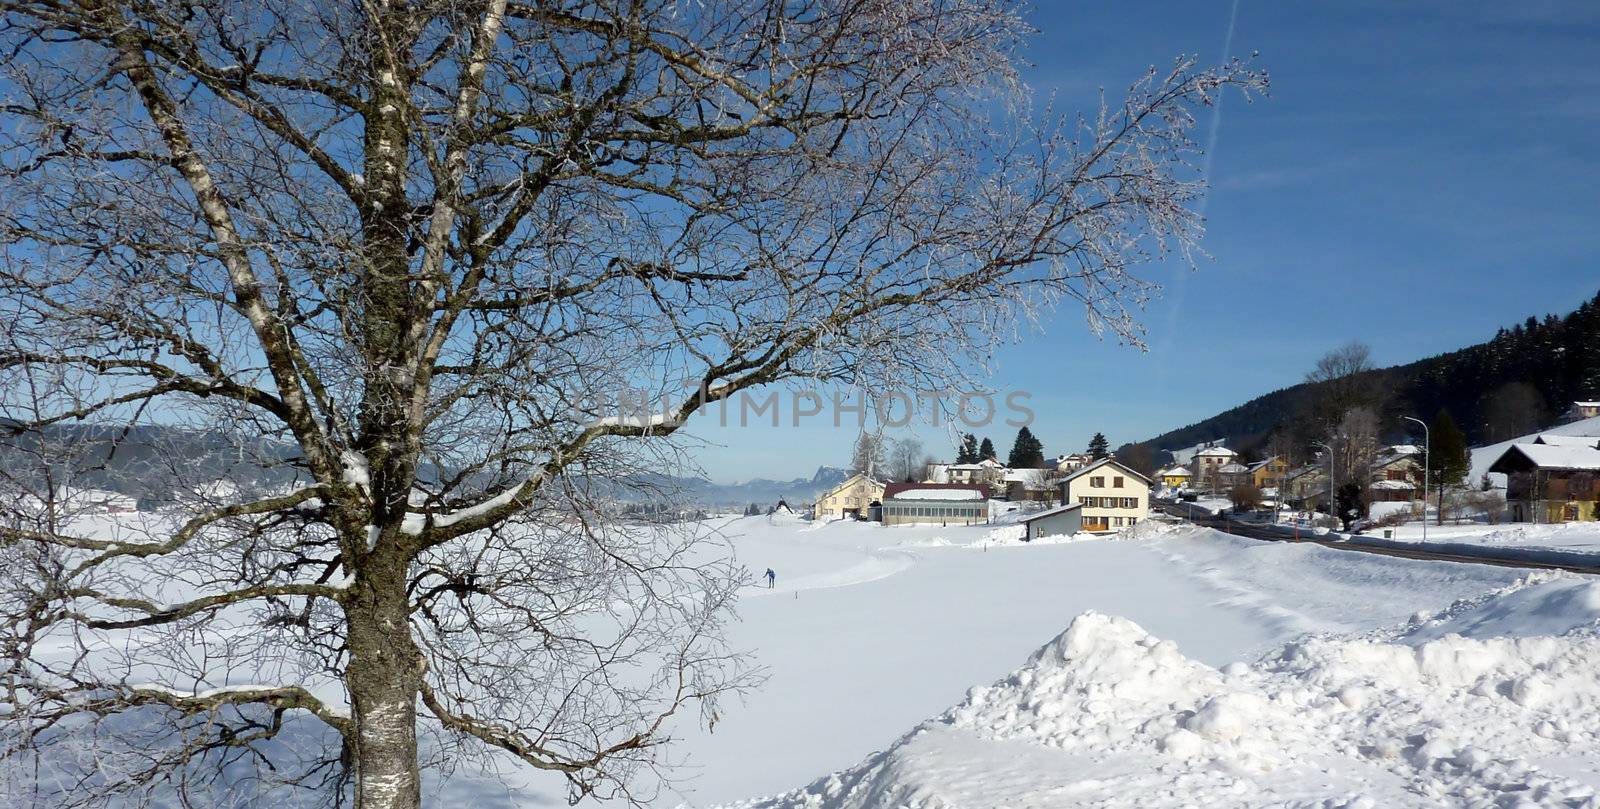 Tree and village by winter and beautiful blue sky